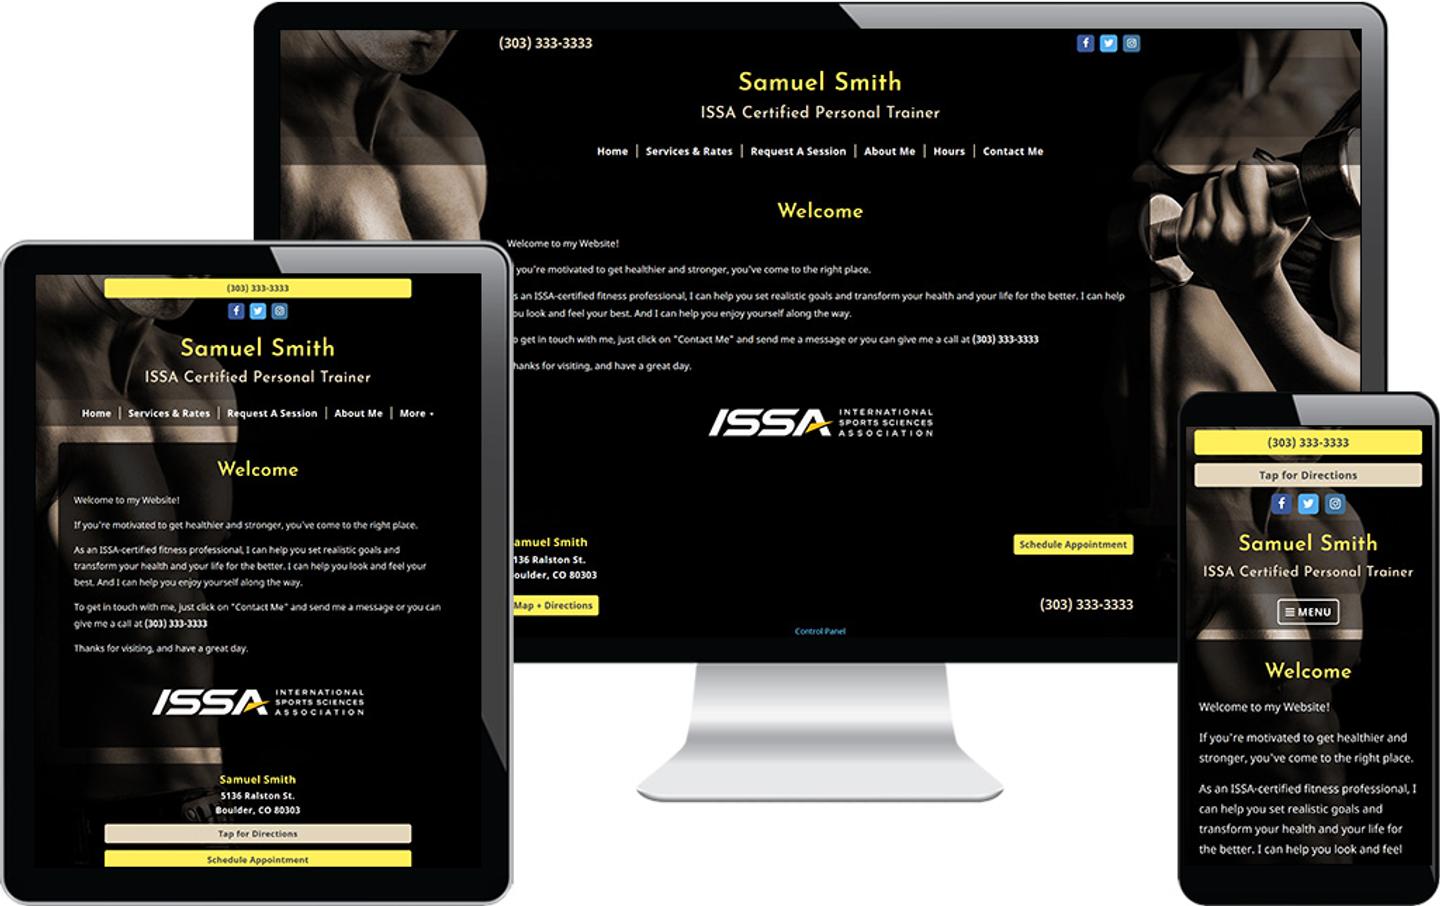 Devices showing the ISSA website